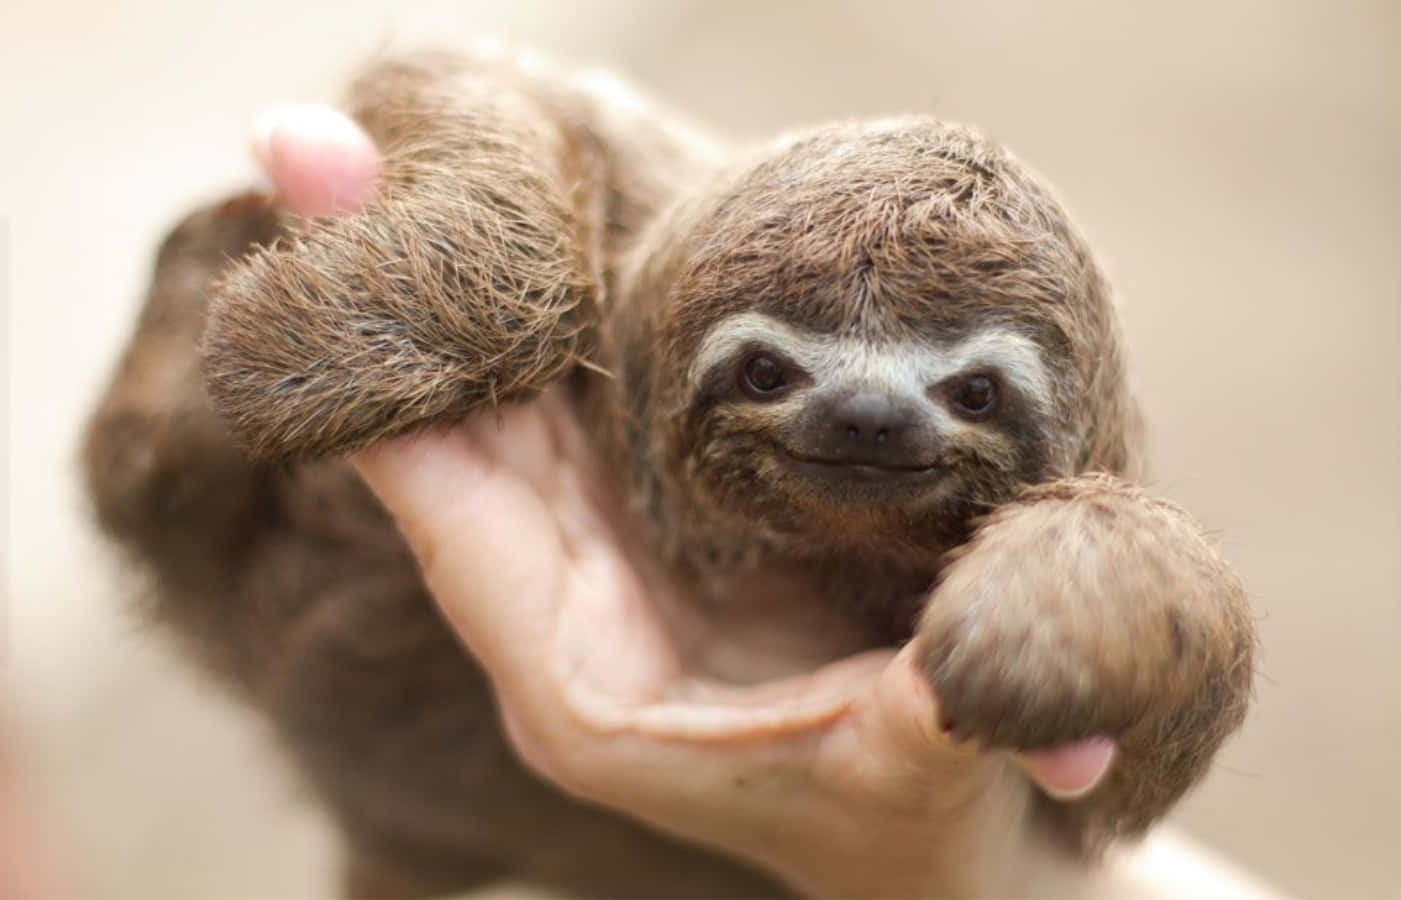 A cute baby sloth hanging happily from a tree branch.